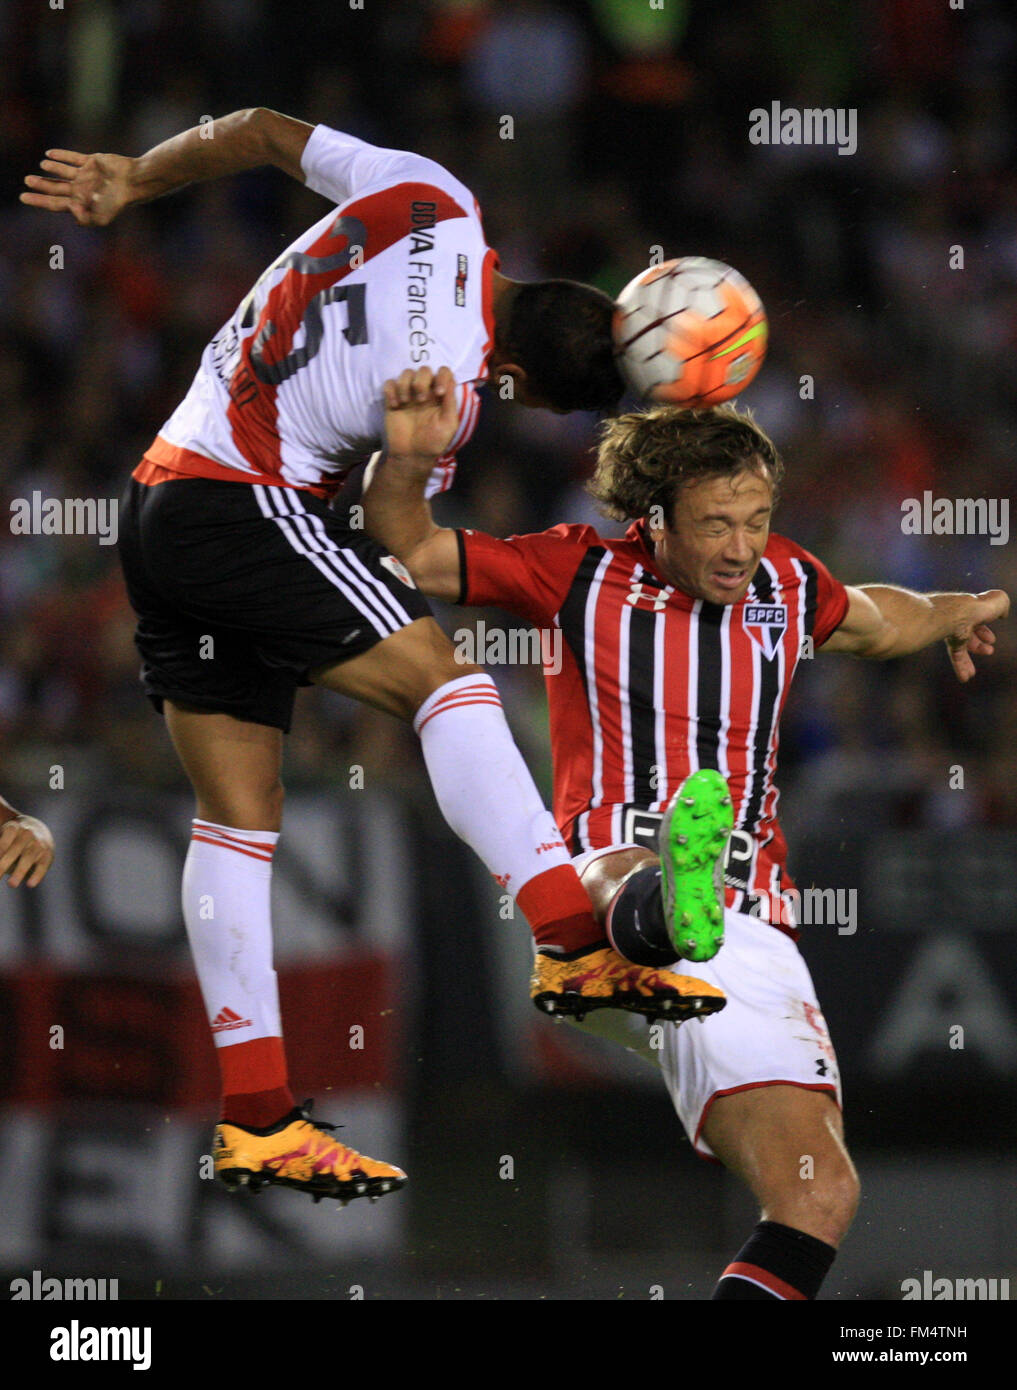 Buenos Aires, Argentina. 10th Mar, 2016. Gabriel Mercado (L) of Argentina's River Plate, vies with Diego Lugano of Brazil's Sao Paulo, during the Group 1 match of the Libertadores Cup, held at Antonio Vespucio Liberti Stadium, in Buenos Aires city, capital of Argentina, on March 10, 2016. © Martin Zabala/Xinhua/Alamy Live News Stock Photo